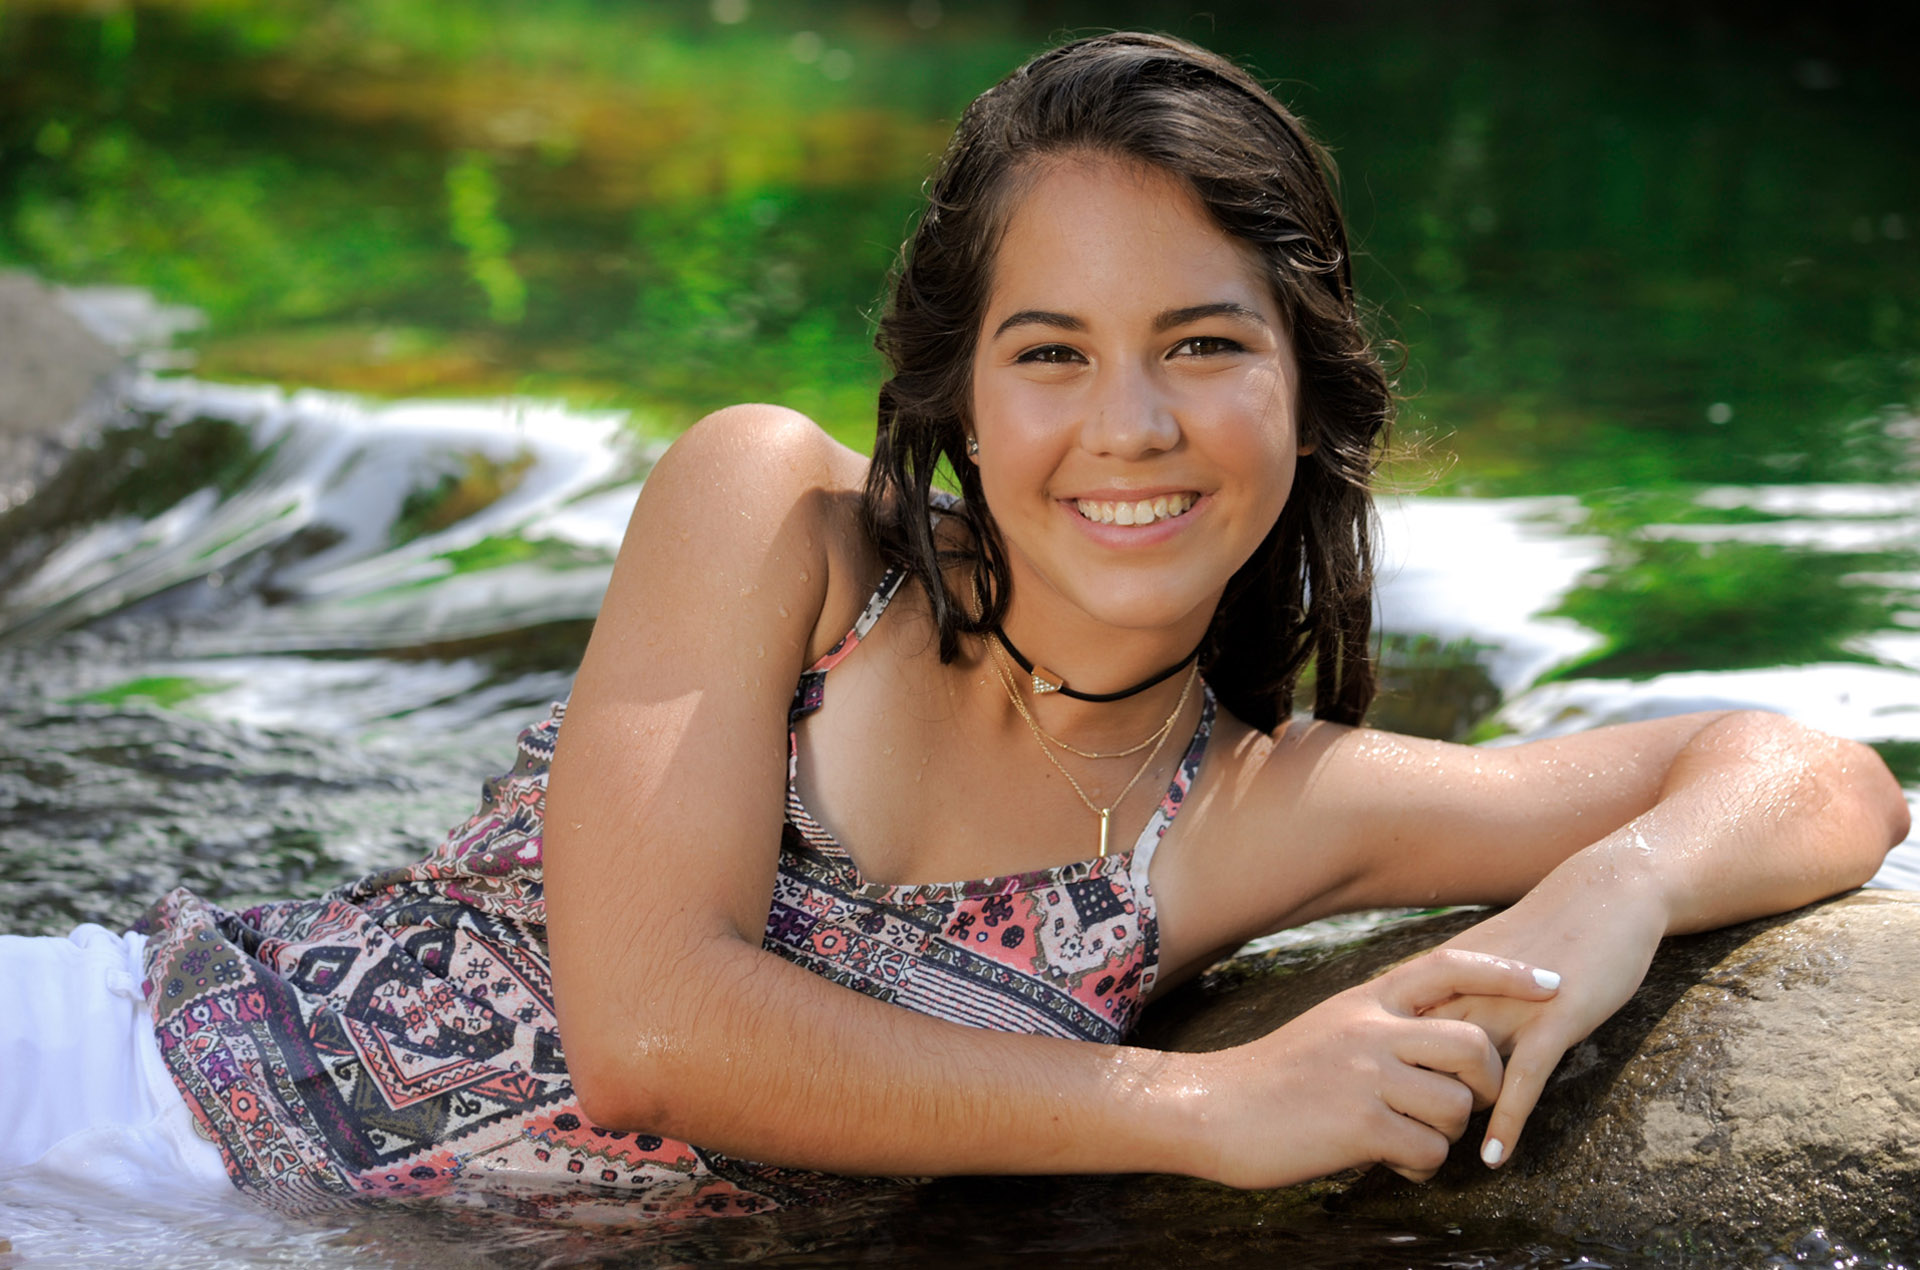 Best Rochester lifestyles photographer covers all the bases of classic children's and kids portraits and lifestyle candid children's and kids photography in Metro Detroit and Rochester, Michigan like this senior laying in the river during the hot summer.